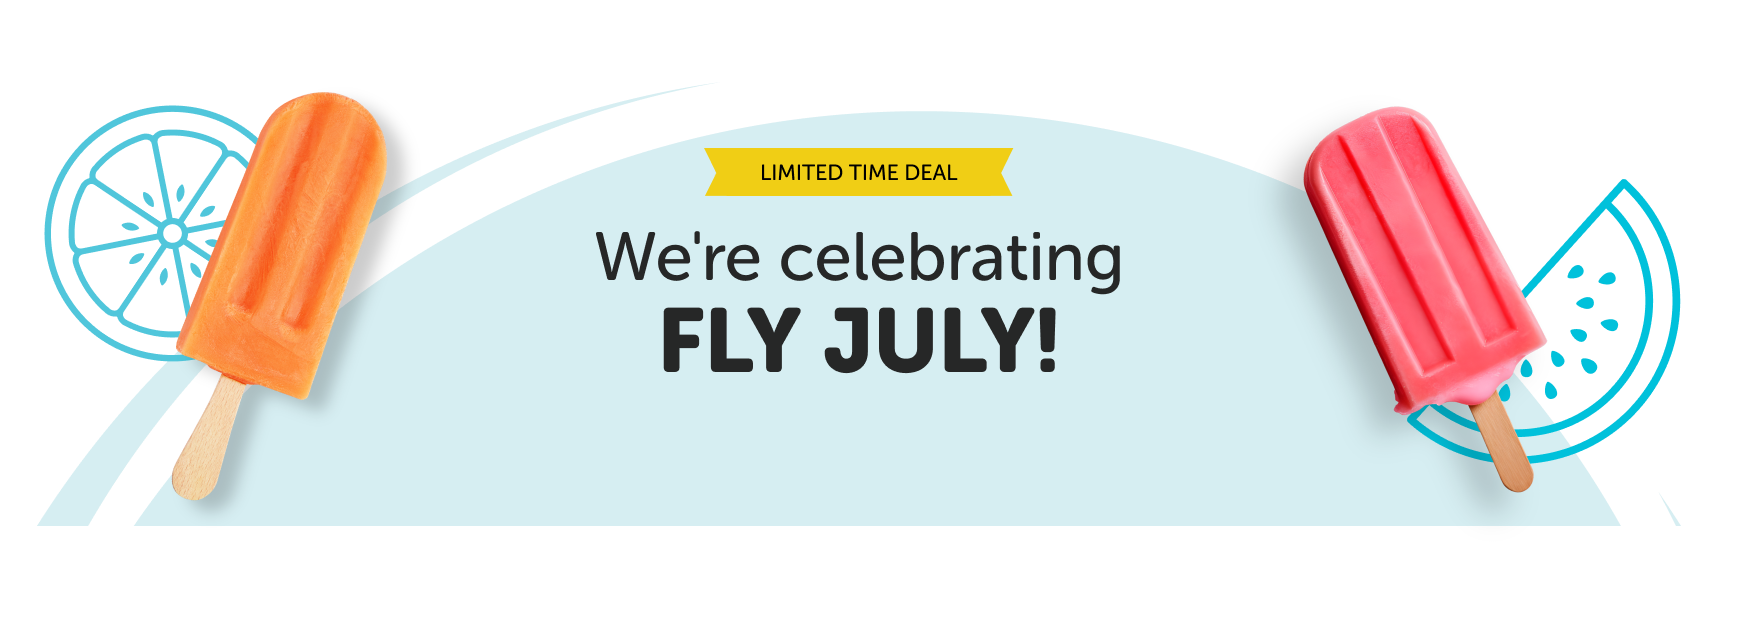 Limited time deal! Fly July sale. Get 4 months free on new annual plans.